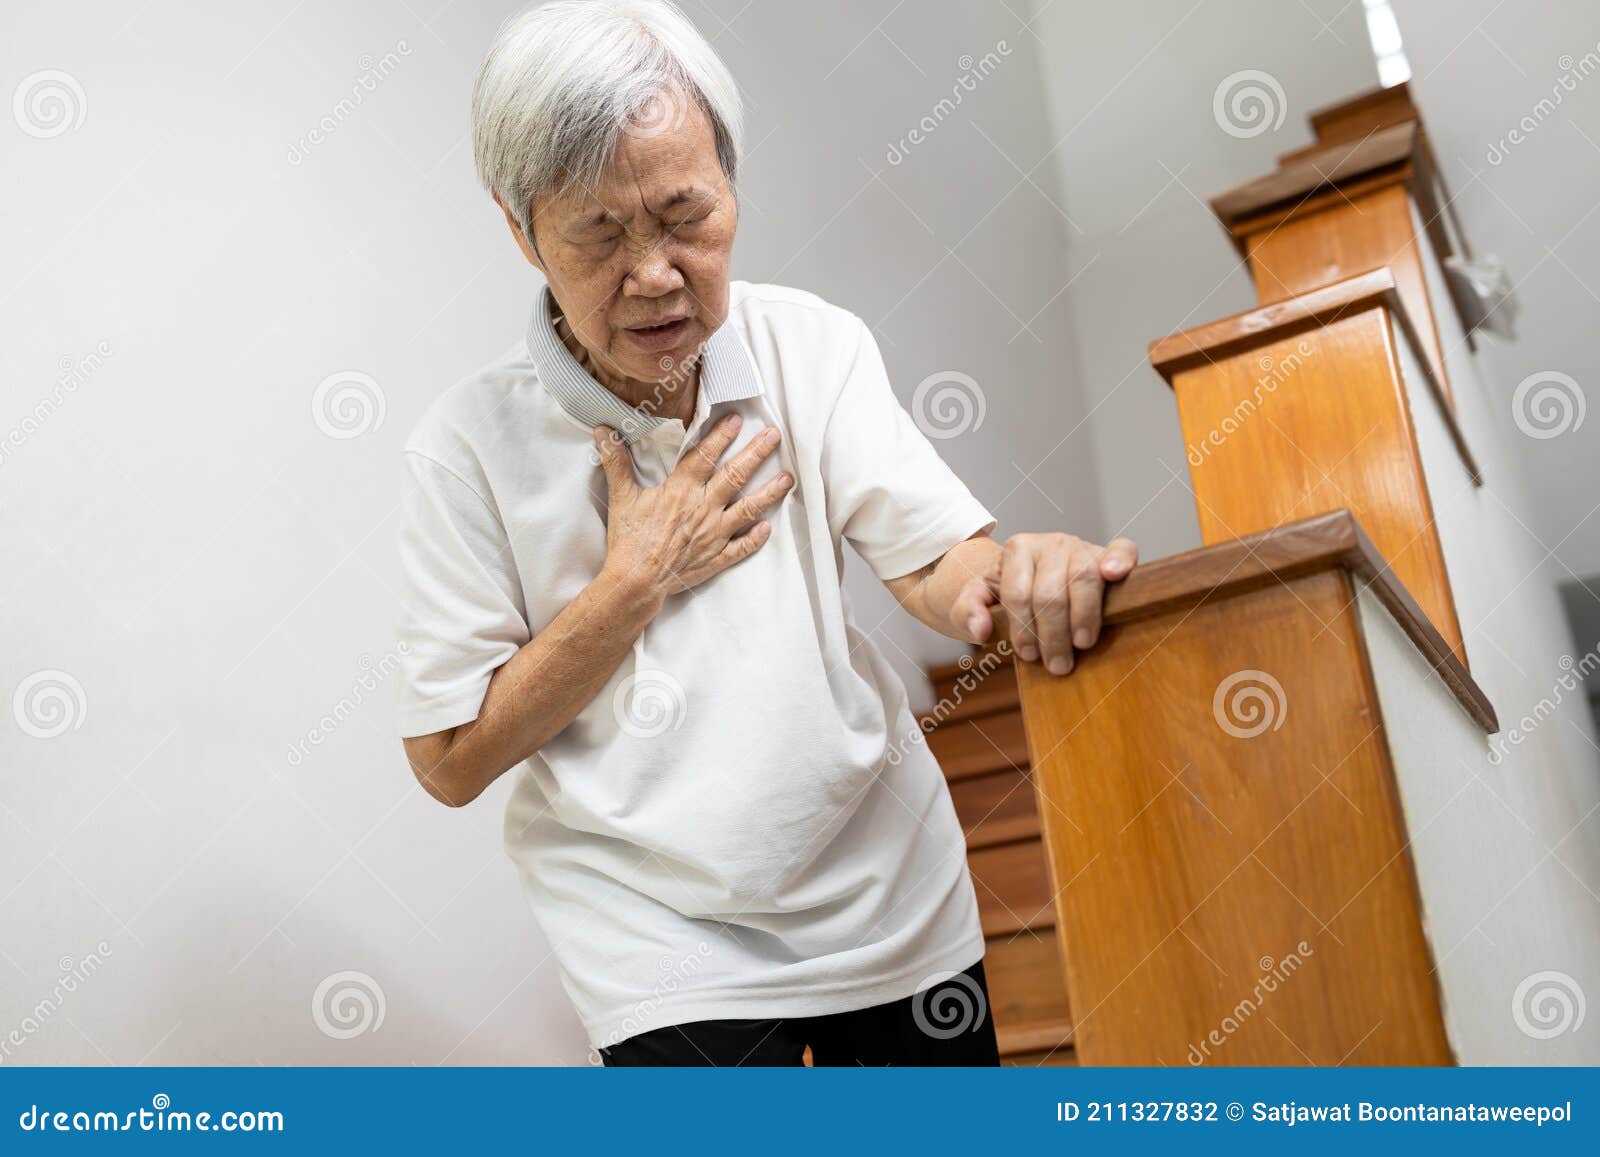 asian senior grandmother suffering from pain in chest with acute dyspnea or asthma disease,tired old elderly eyes closed and hand